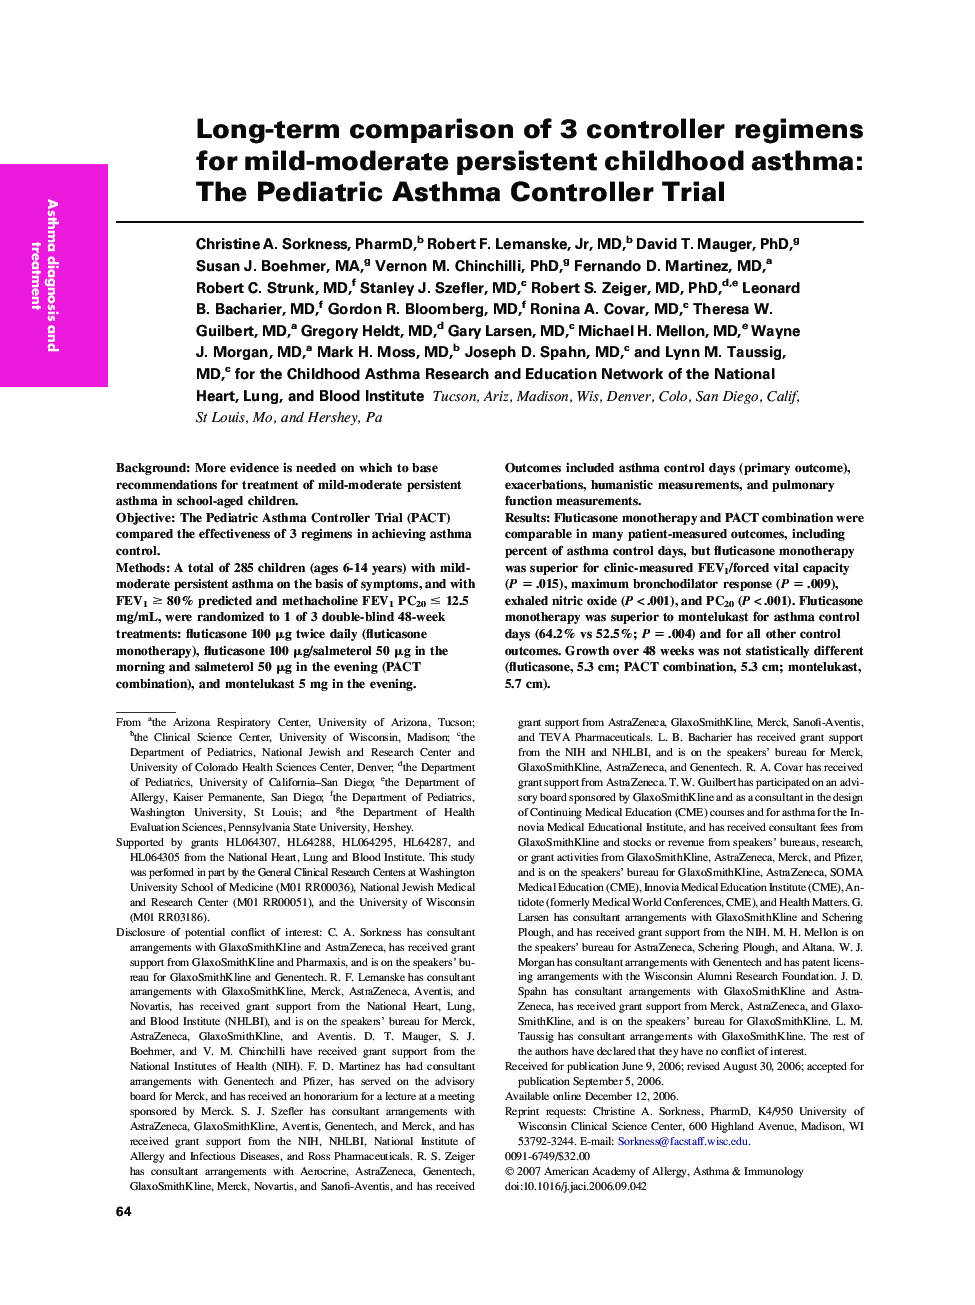 Long-term comparison of 3 controller regimens for mild-moderate persistent childhood asthma: The Pediatric Asthma Controller Trial 